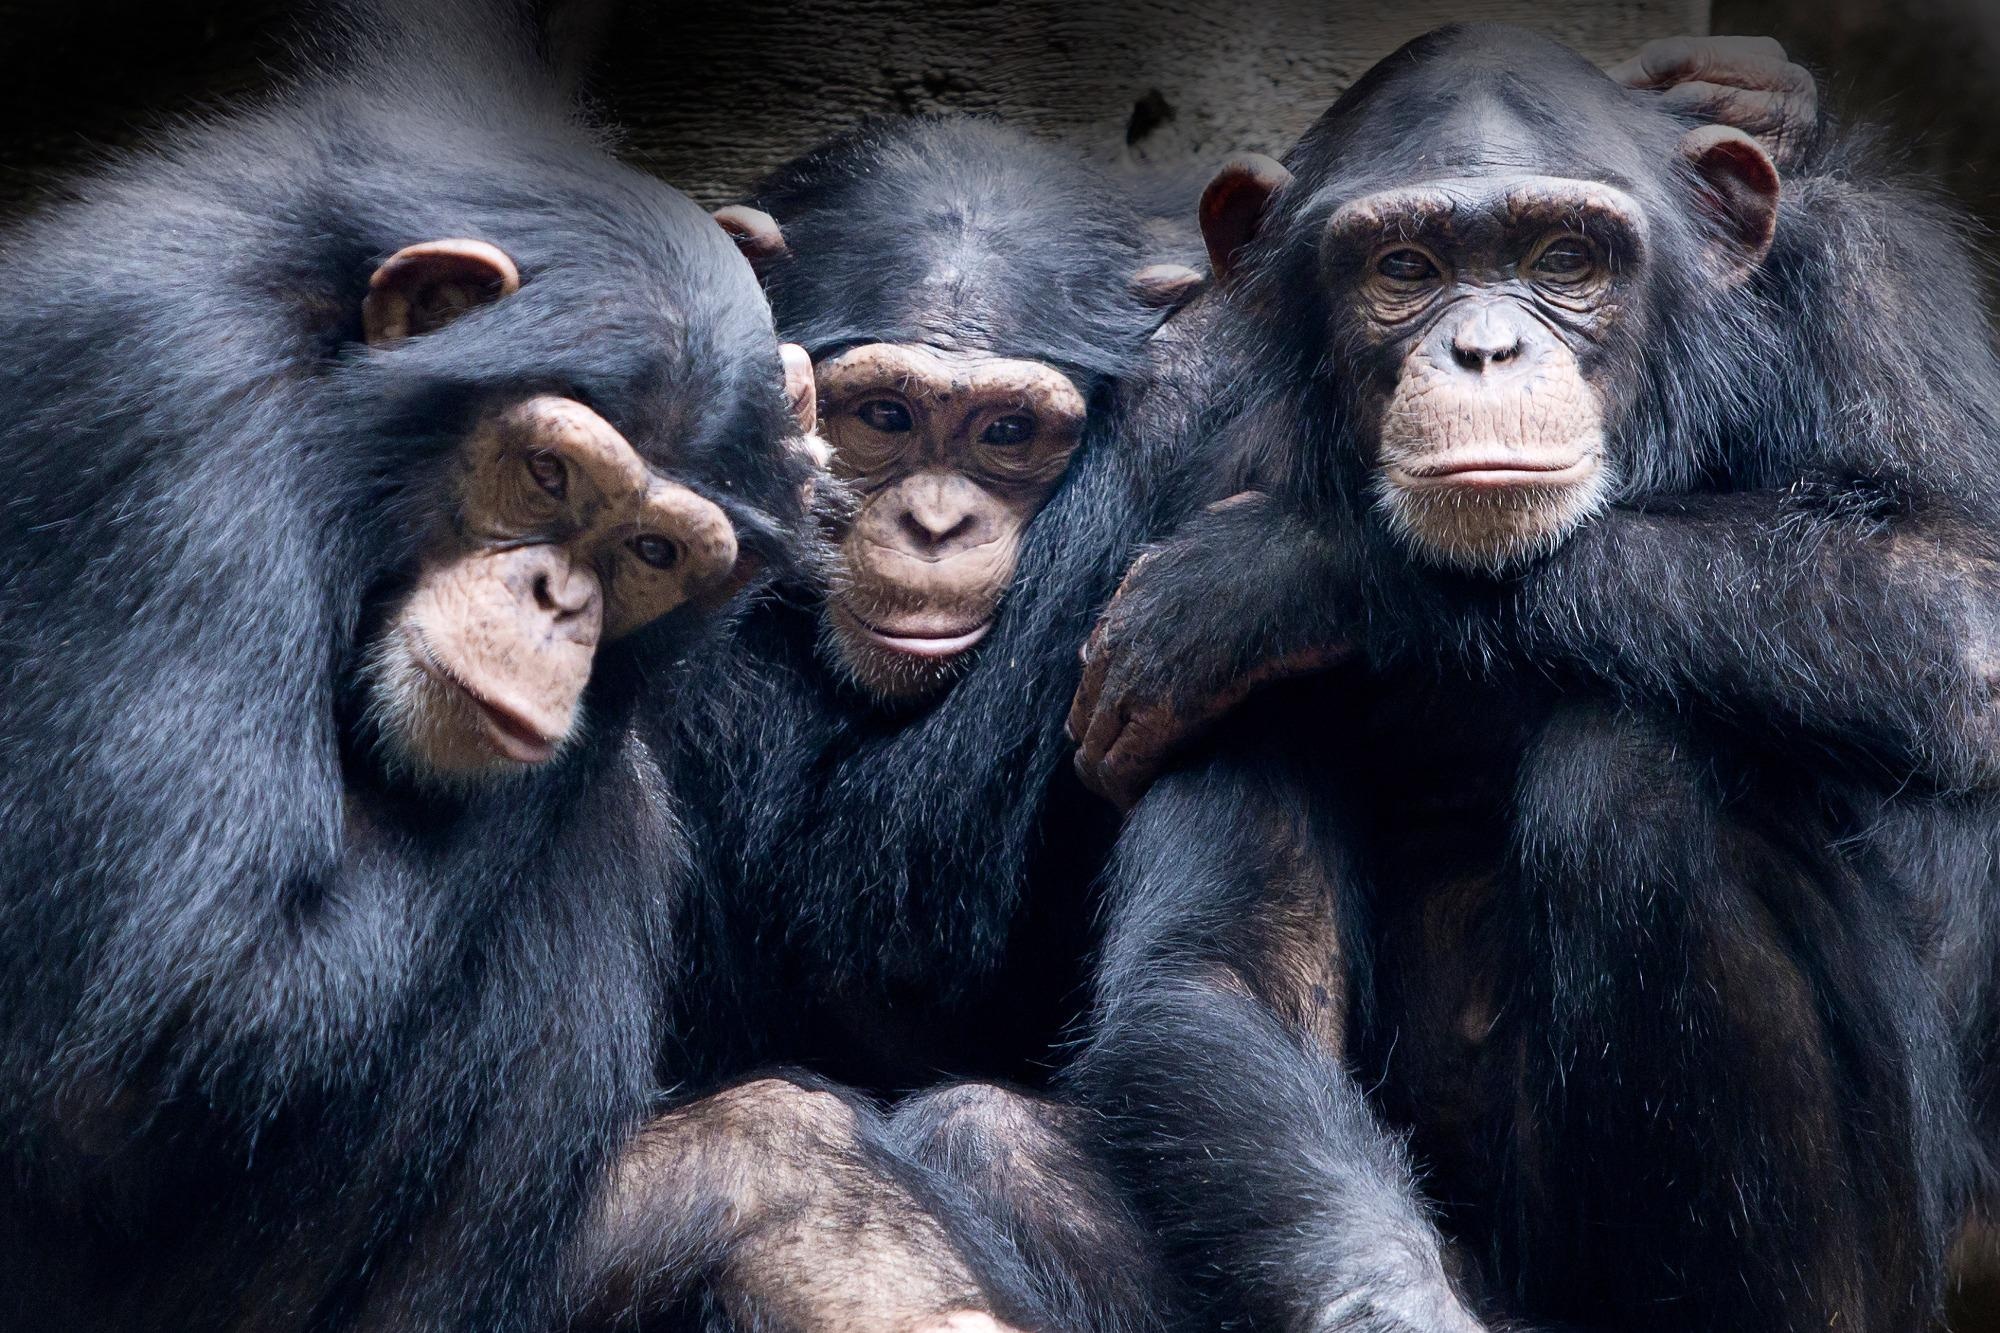 Study: Evidence for reduced BRCA2 functional activity in Homo sapiens after divergence from the chimpanzee-human last common ancestor. Image Credit: Lili Aini / Shutterstock